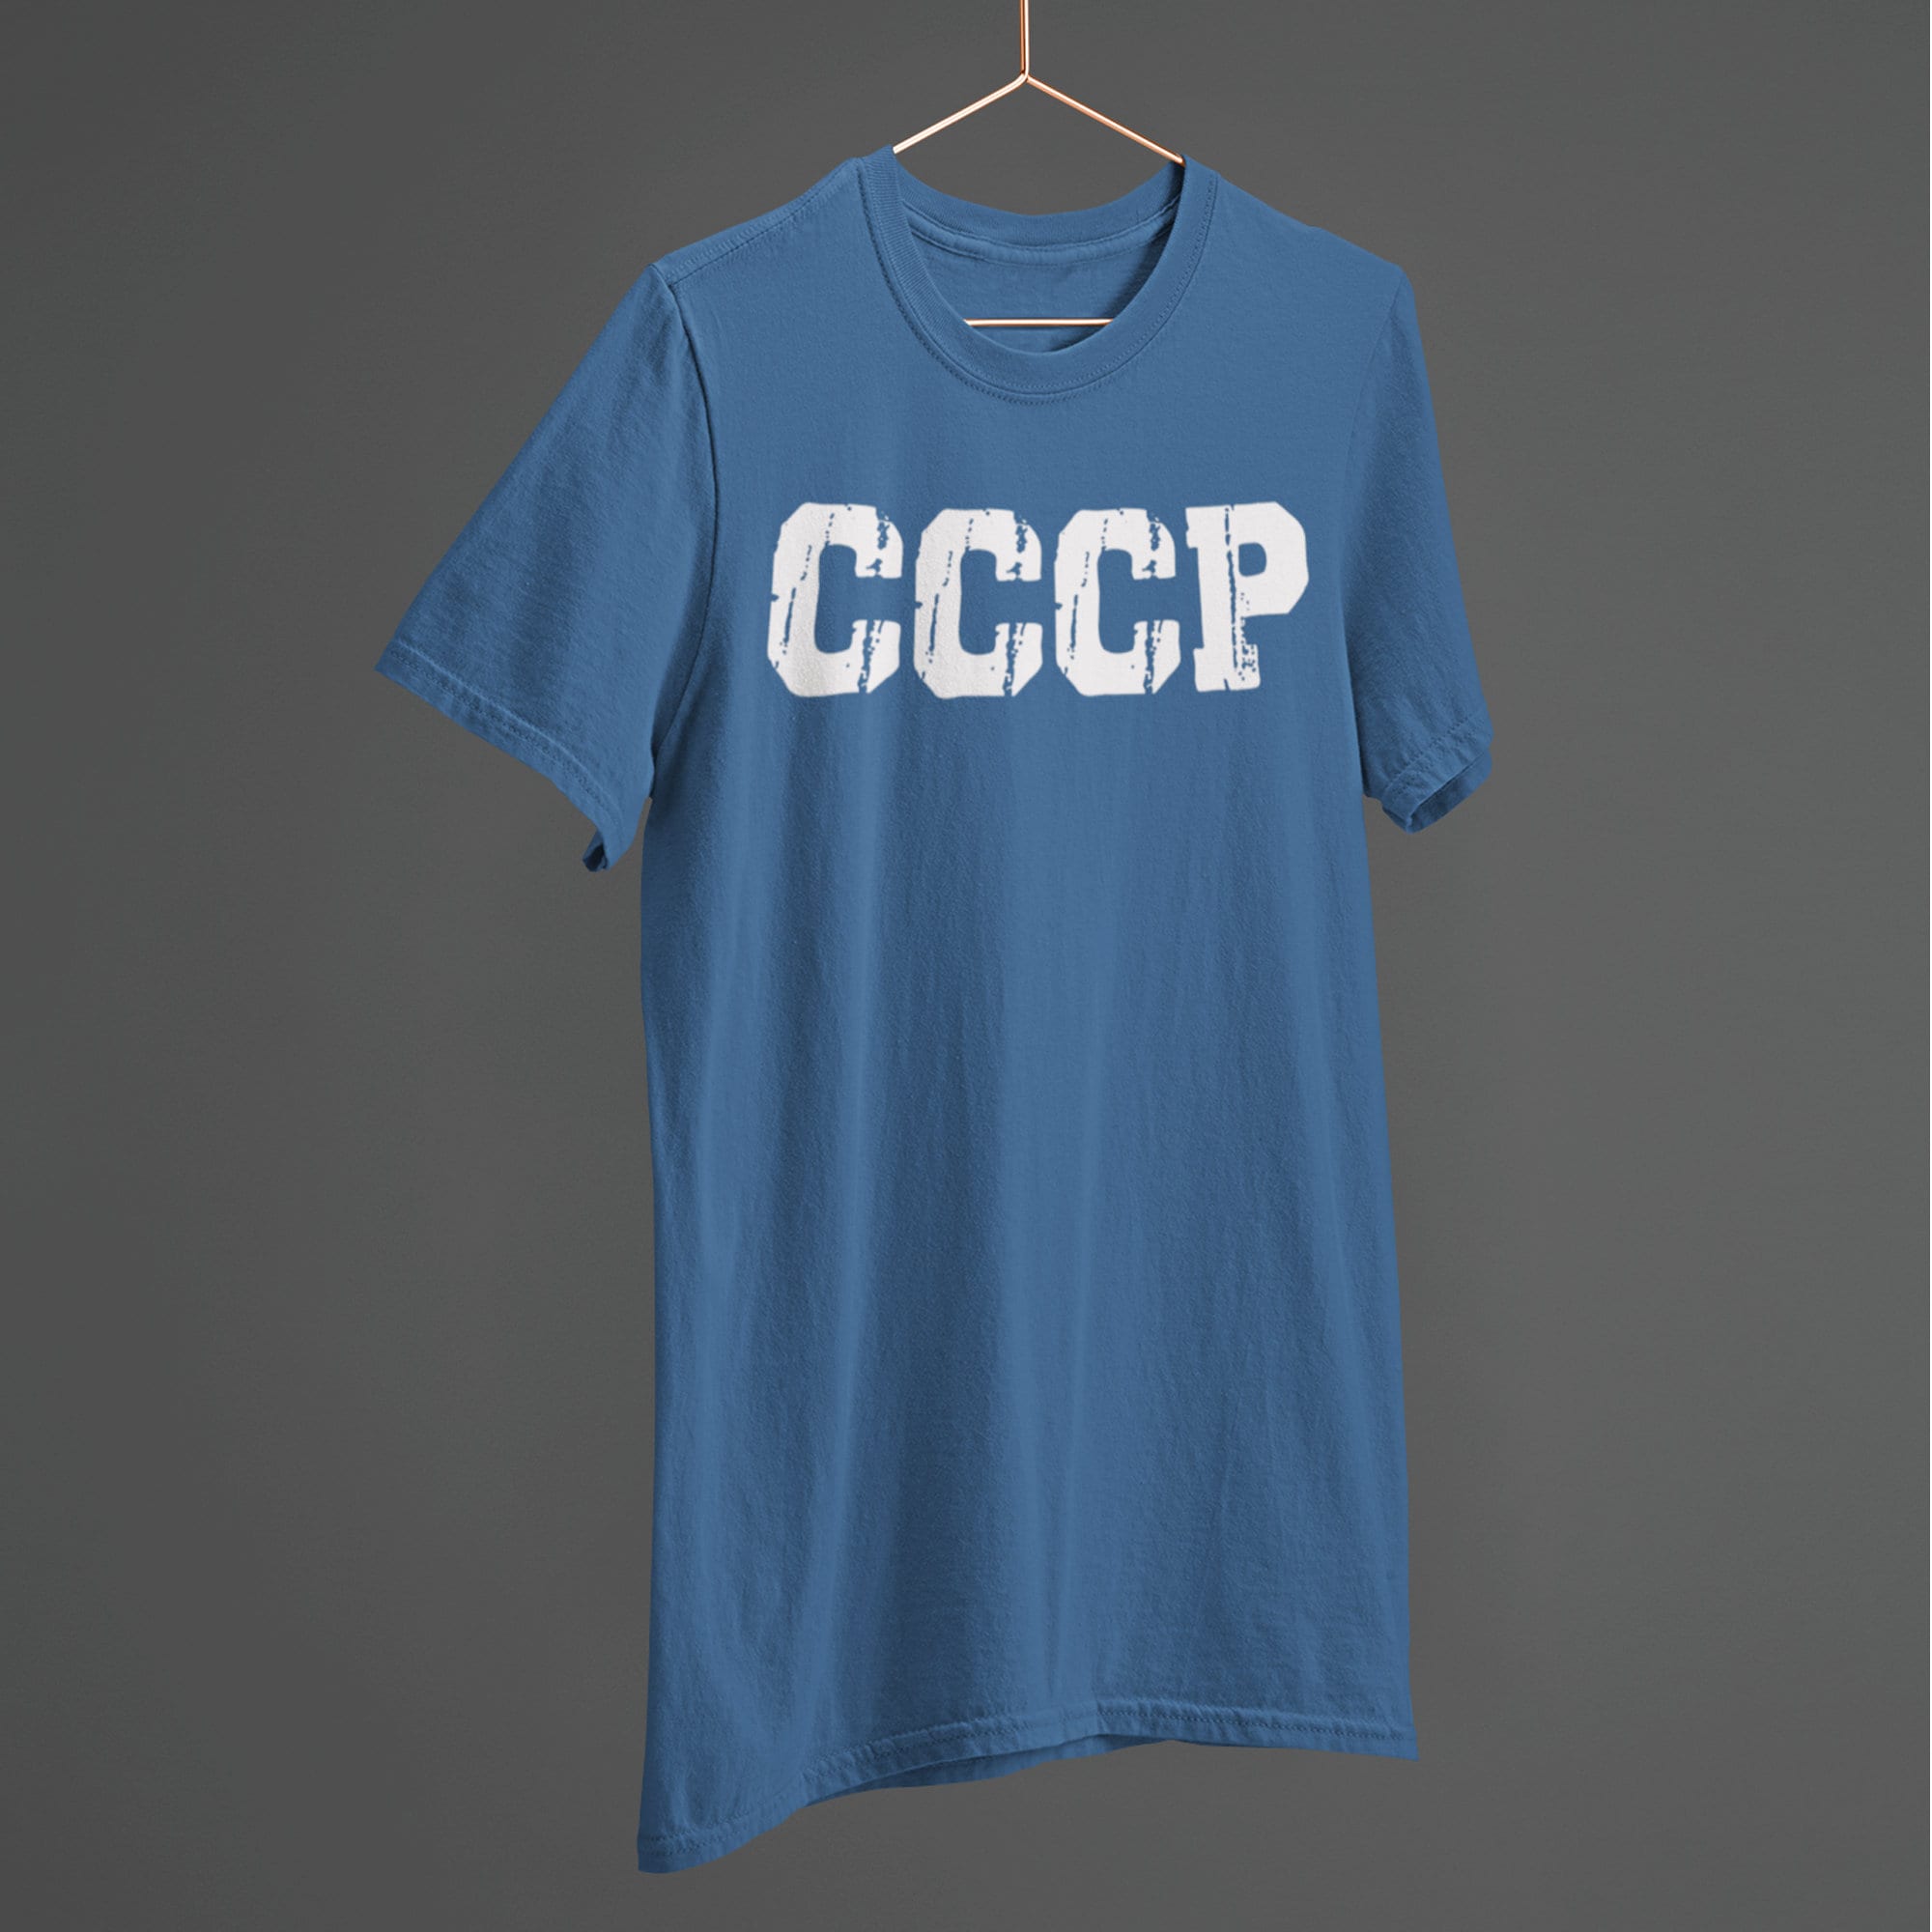 USSR Retrofootball Shirts - unique collection